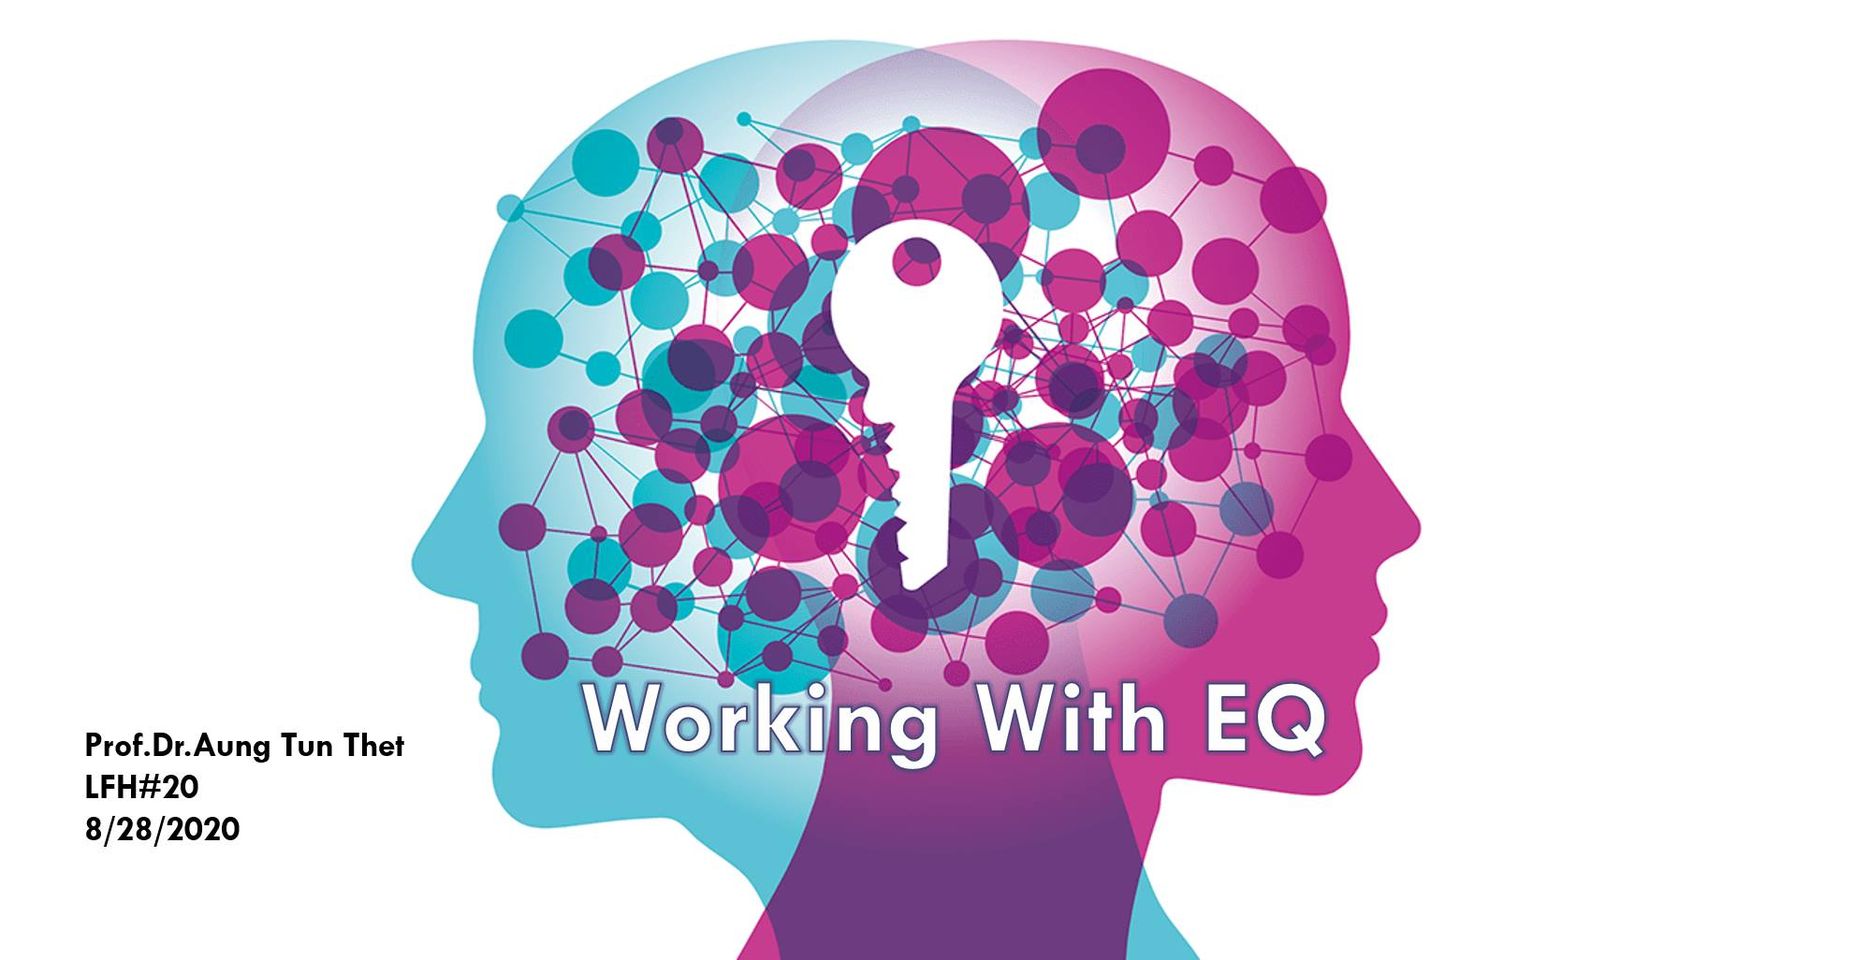 Working with EQ